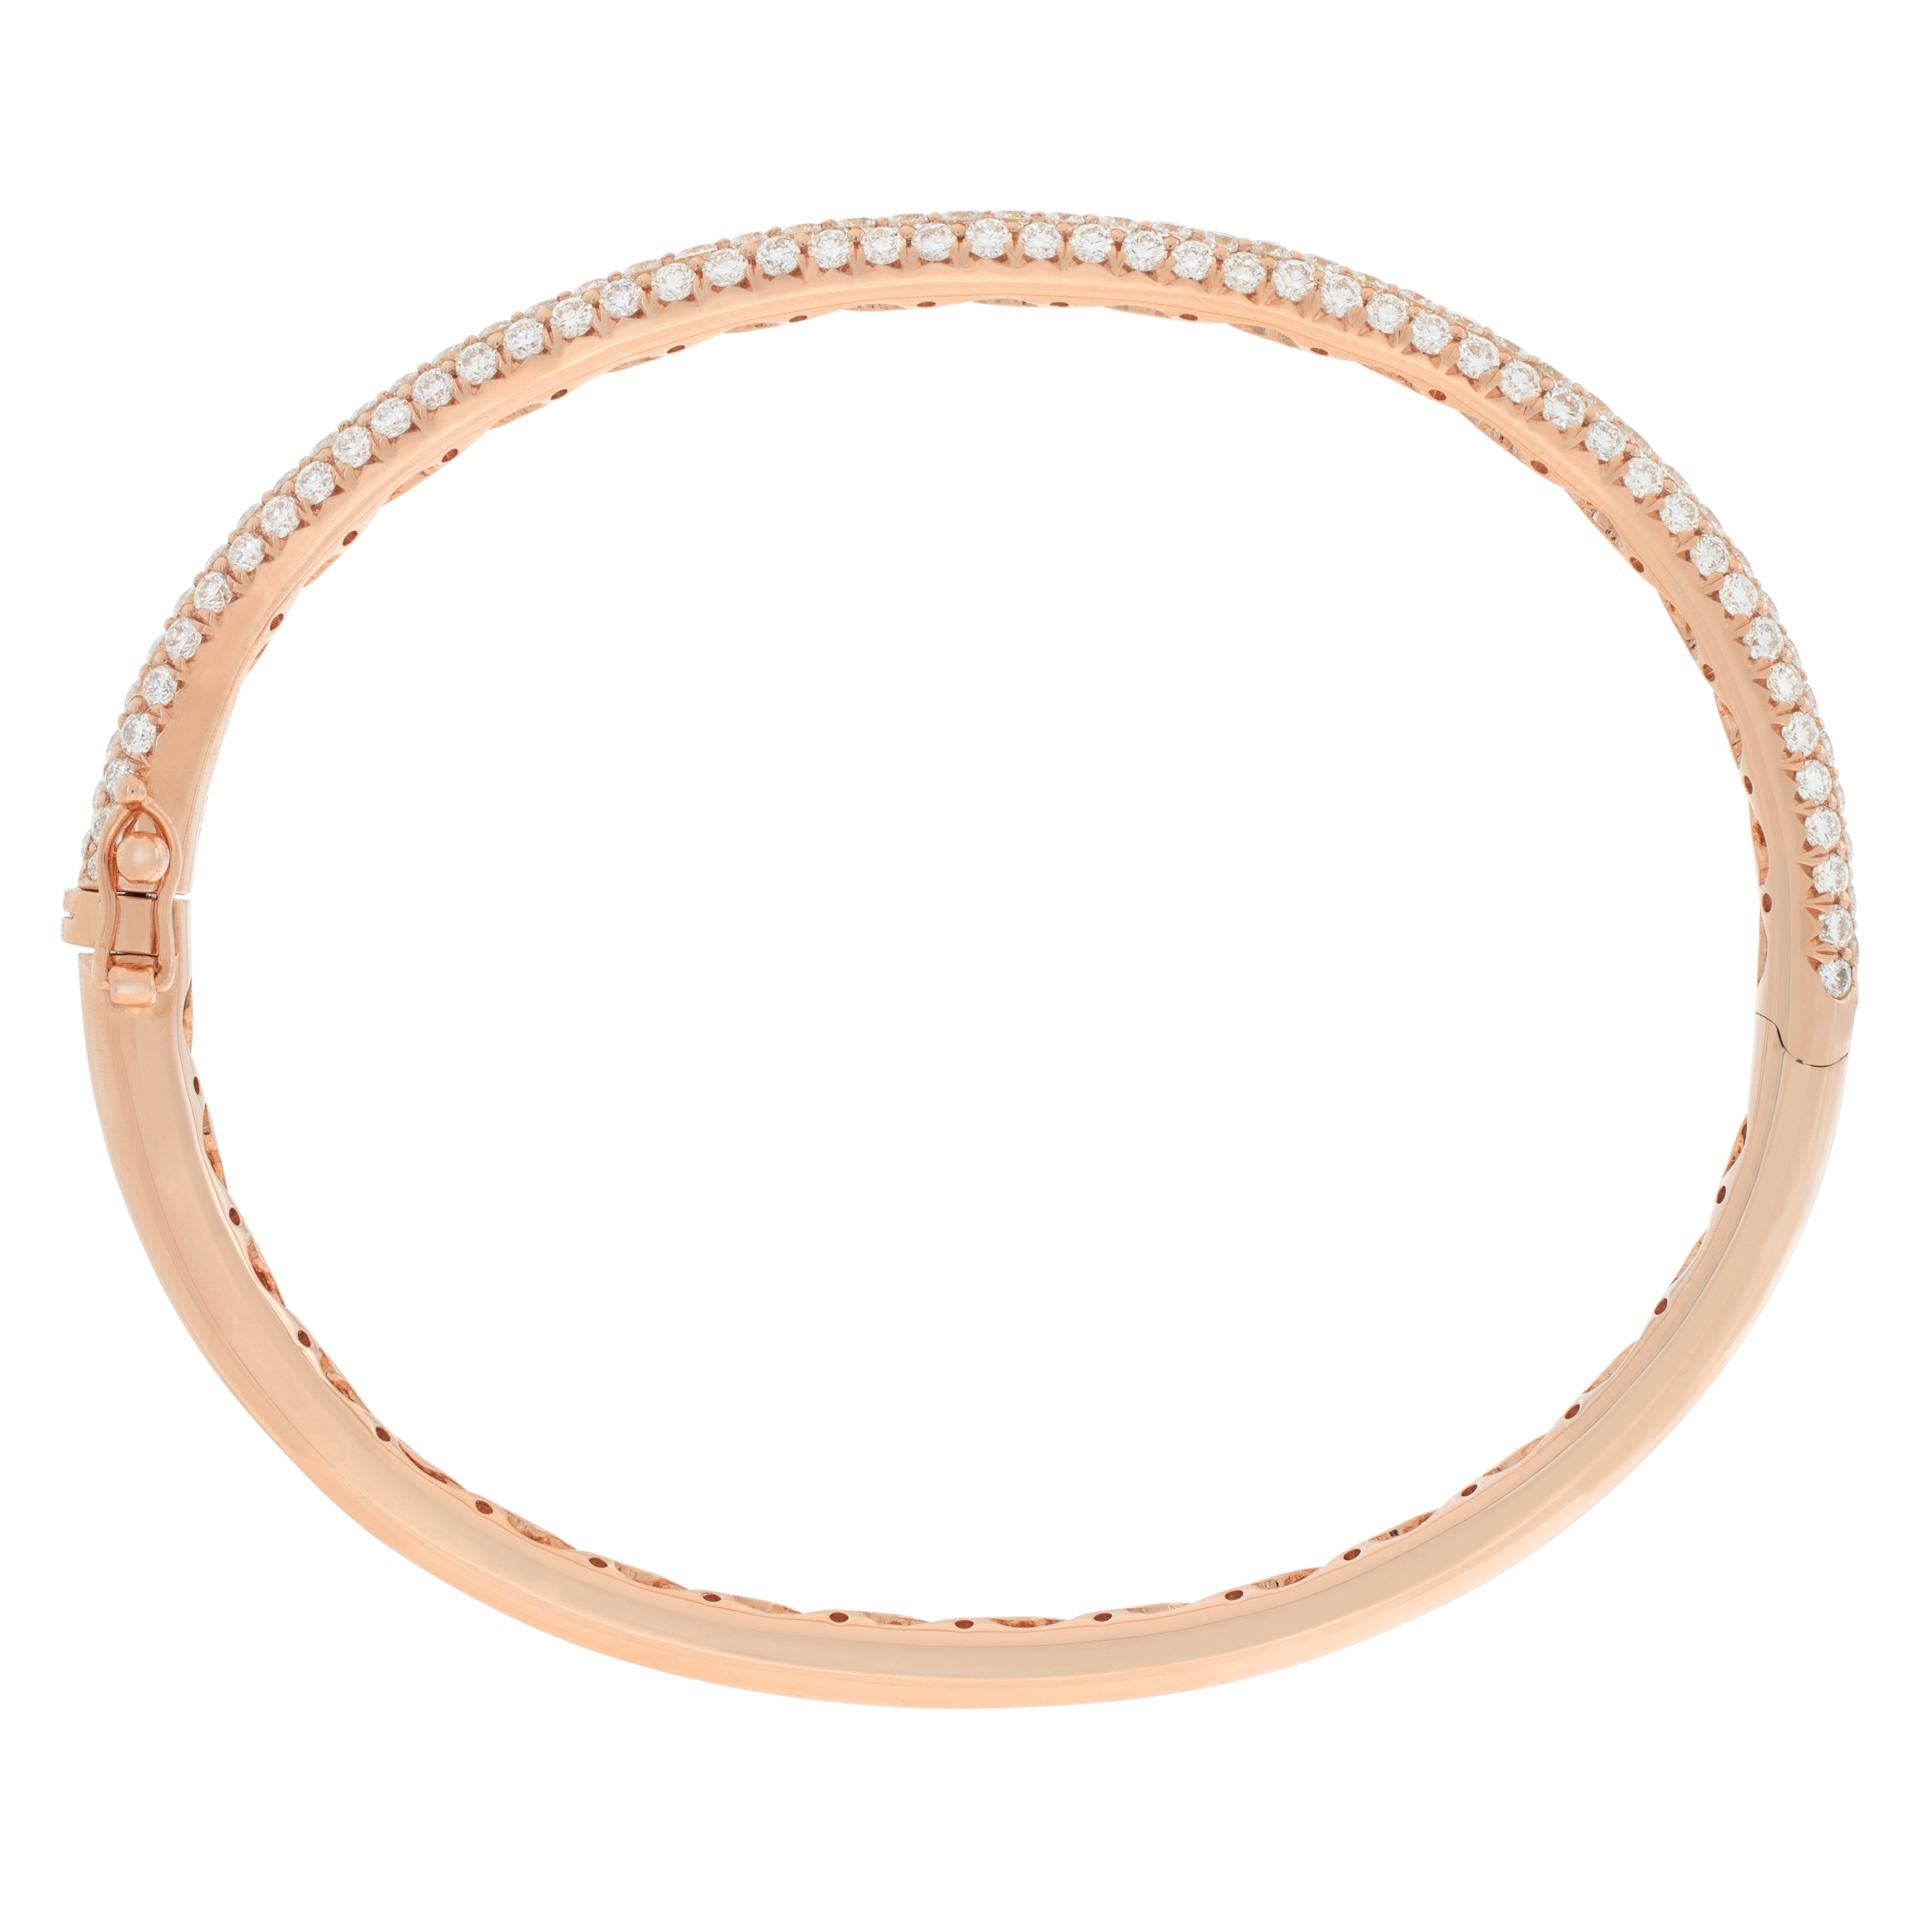 Women's 18k Rose Gold Bangle with 2.86 Carats in Round Brilliant Cut Pave Diamonds